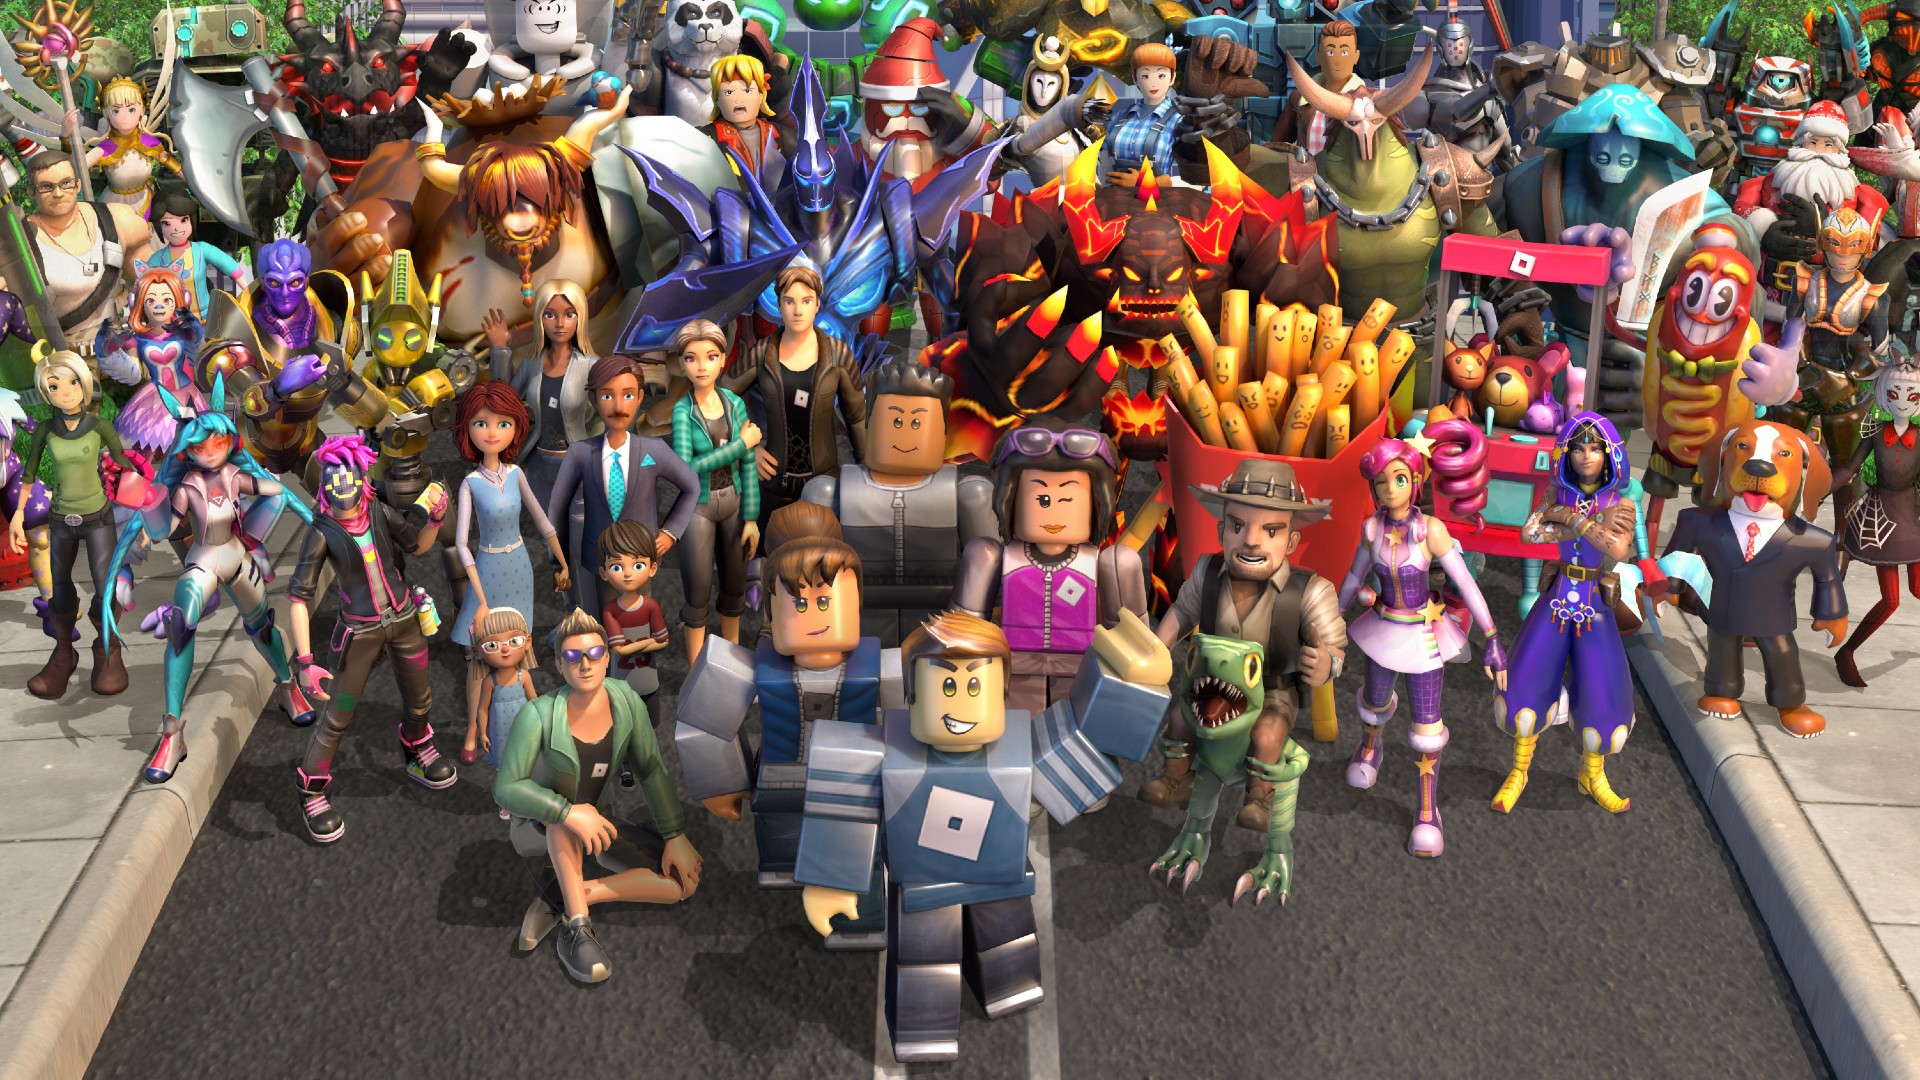 Roblox promo codes list June 2021 – how to redeem